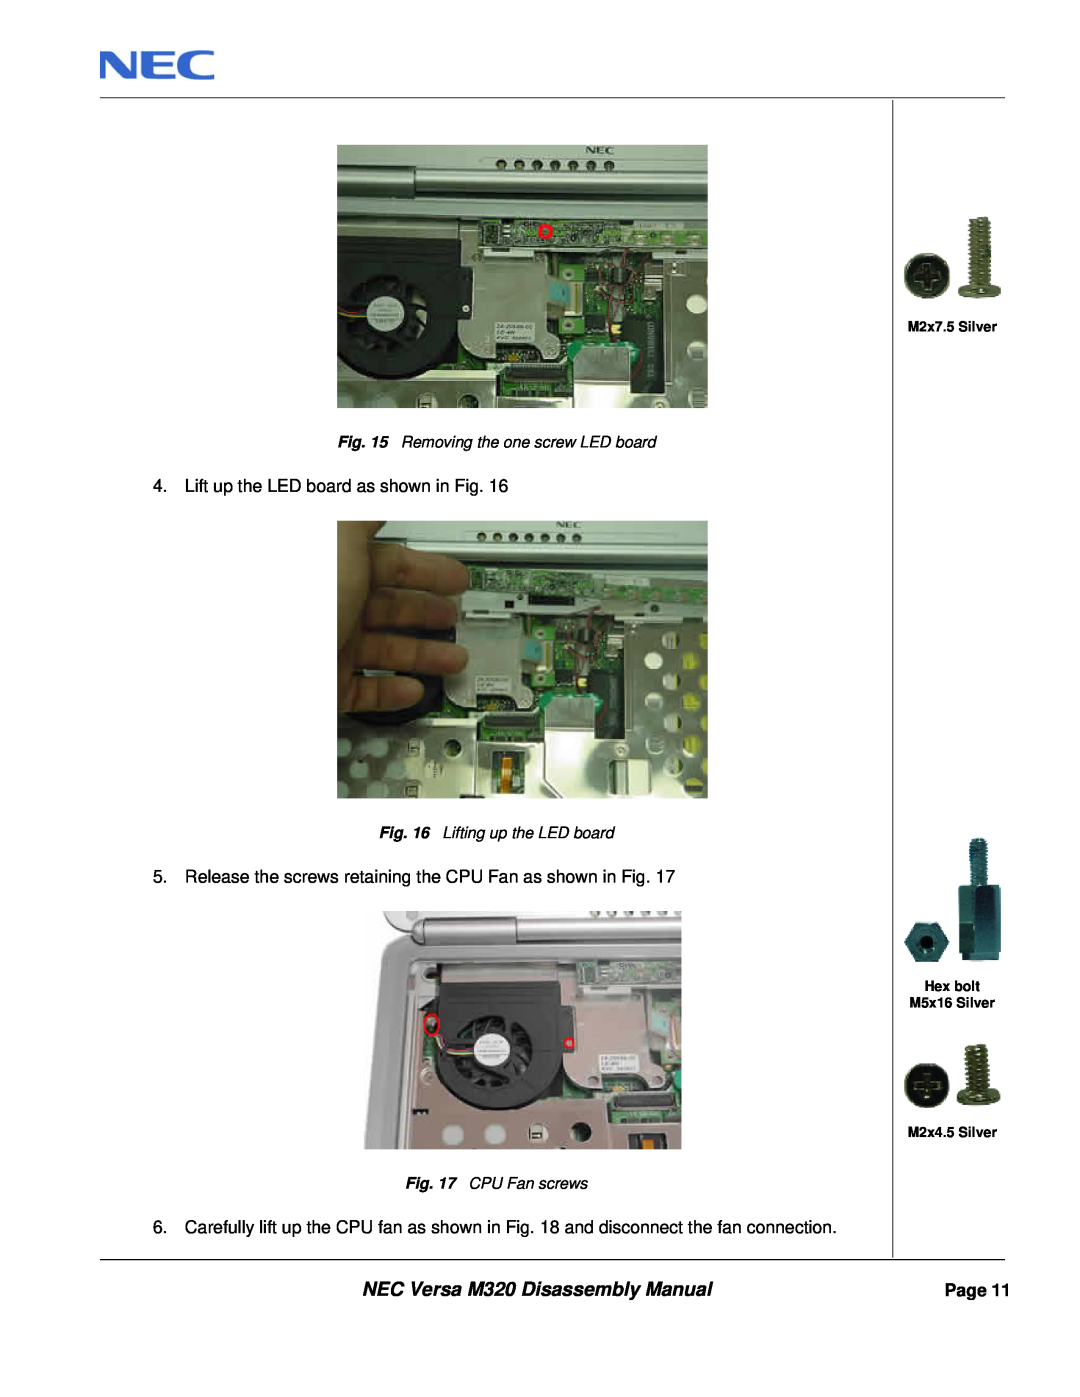 NEC manual NEC Versa M320 Disassembly Manual, Lift up the LED board as shown in Fig 